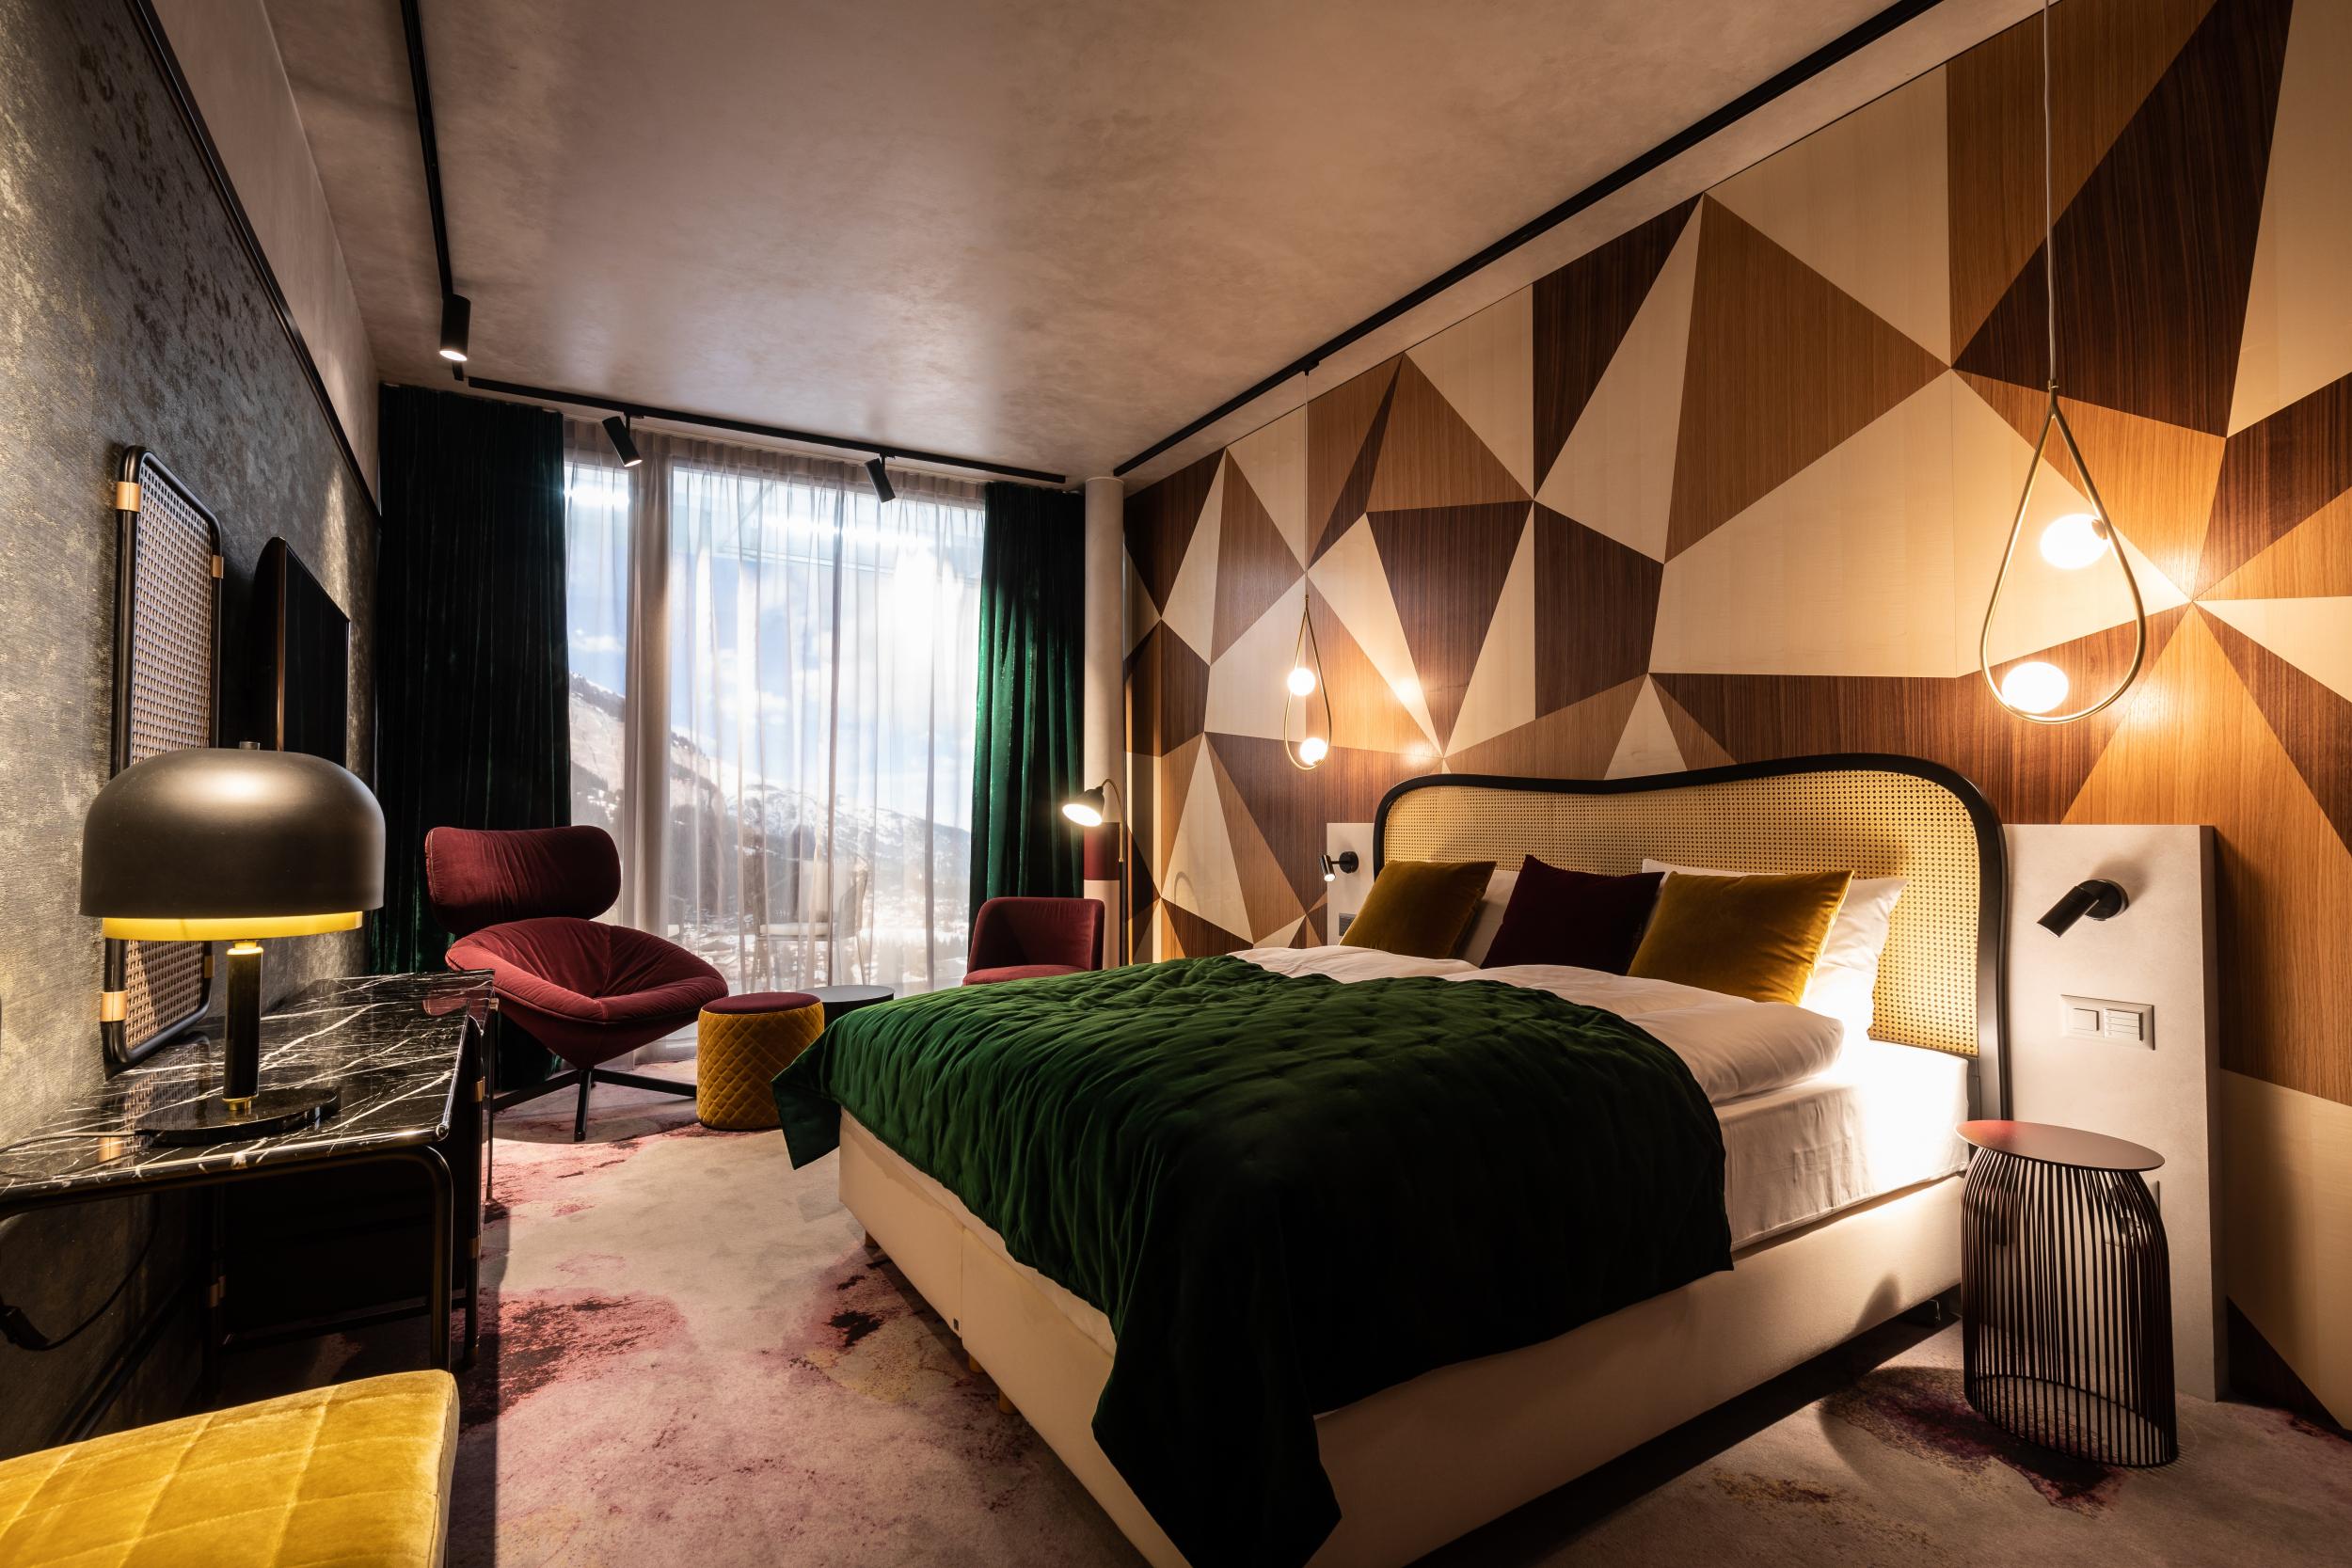 The Hide brings trendy style to Flims